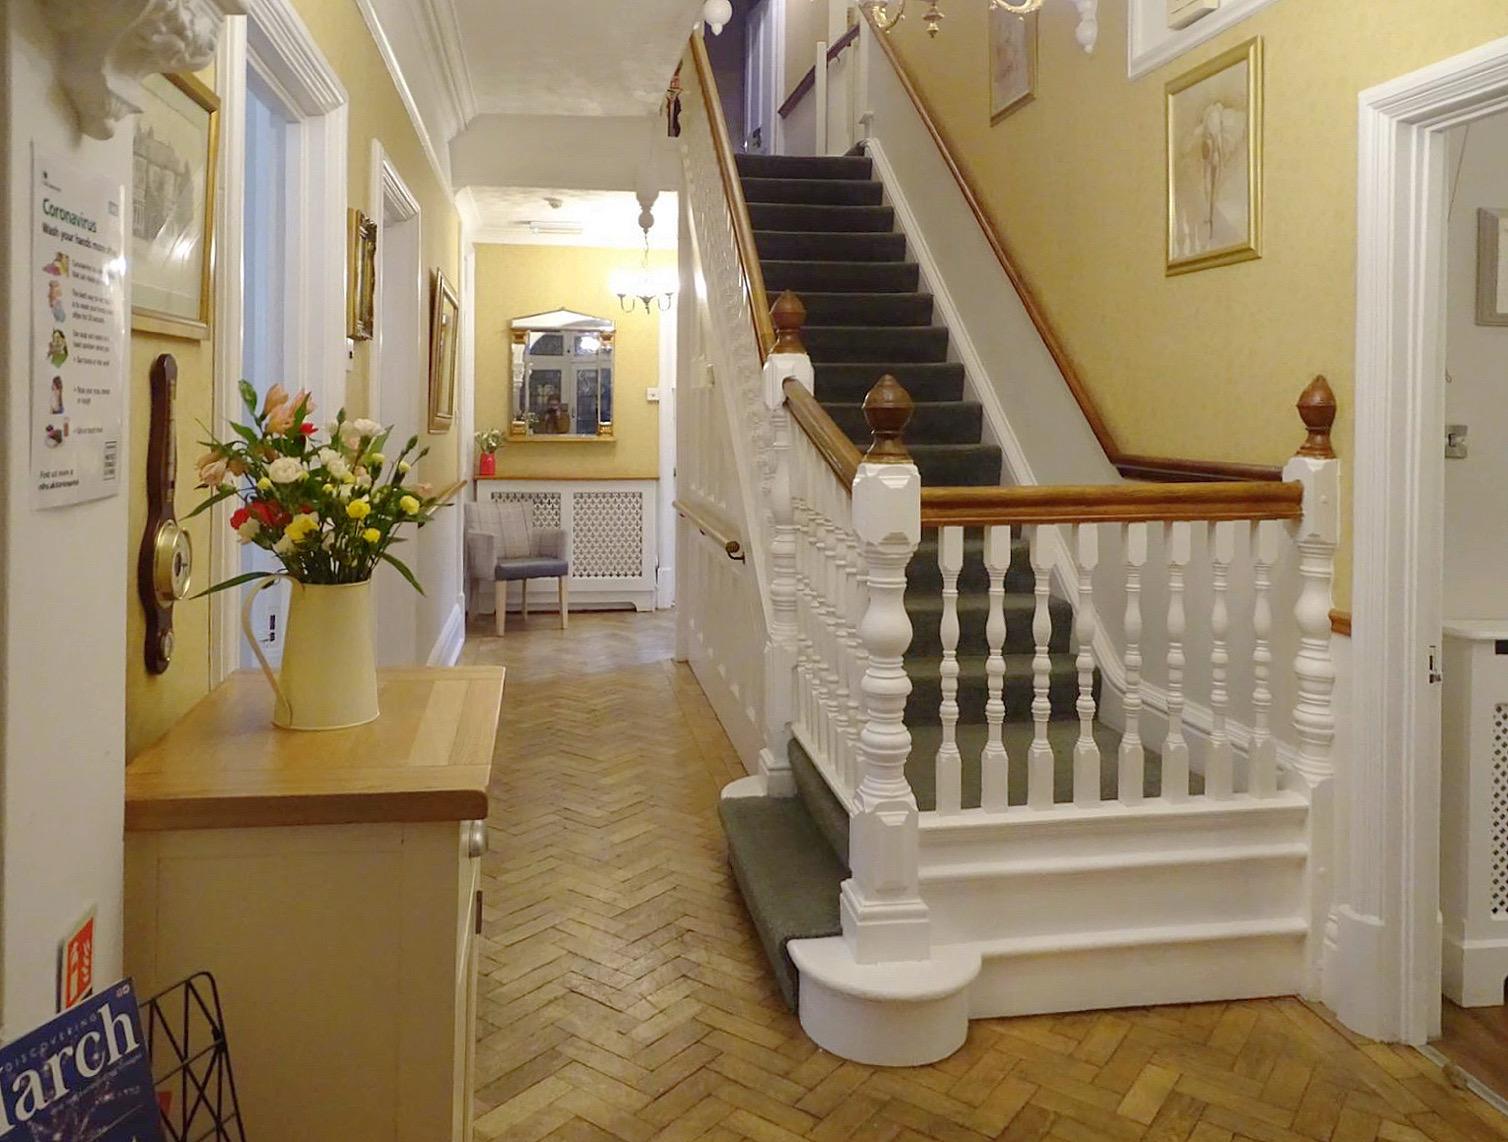 view of a staircase at Clovelly House